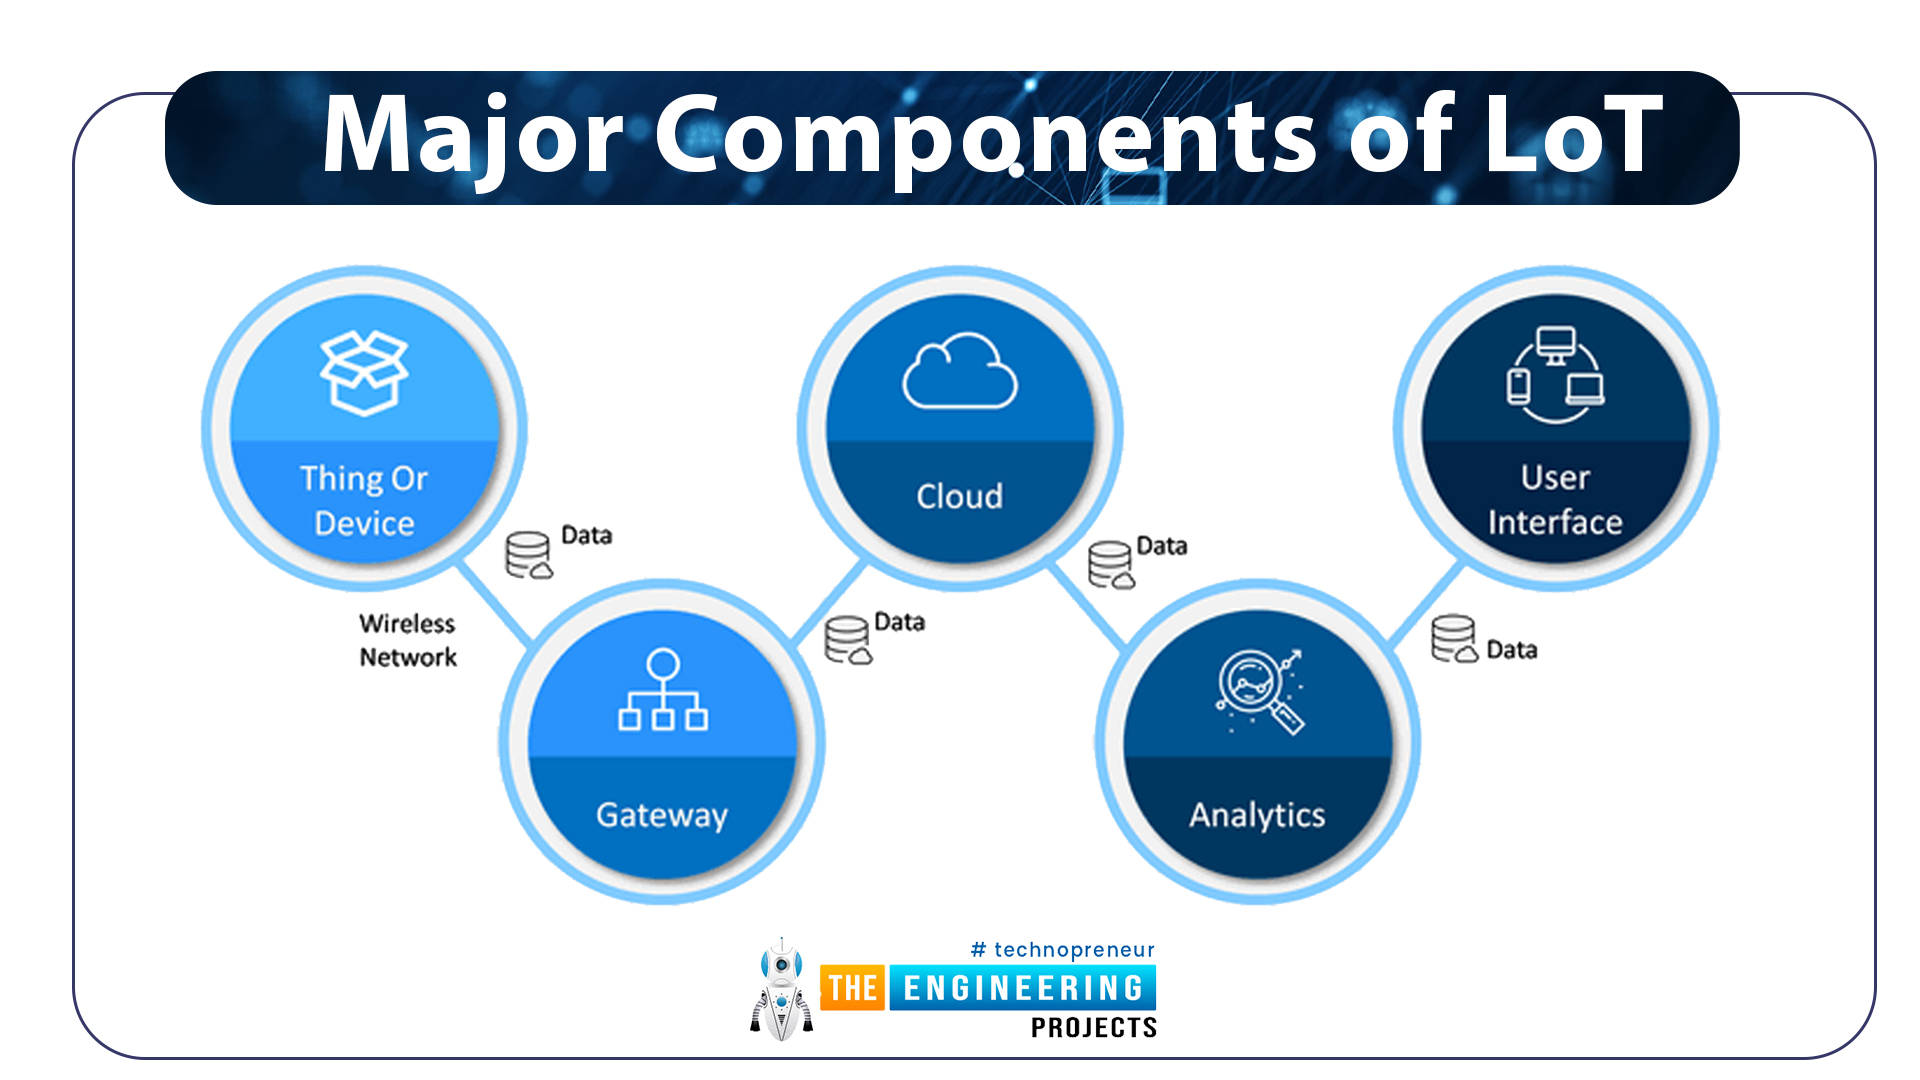 Introduction of IoT components, IoT components, sensors in Iot, connectivity, gateway, cloud computing, user interface, GUI